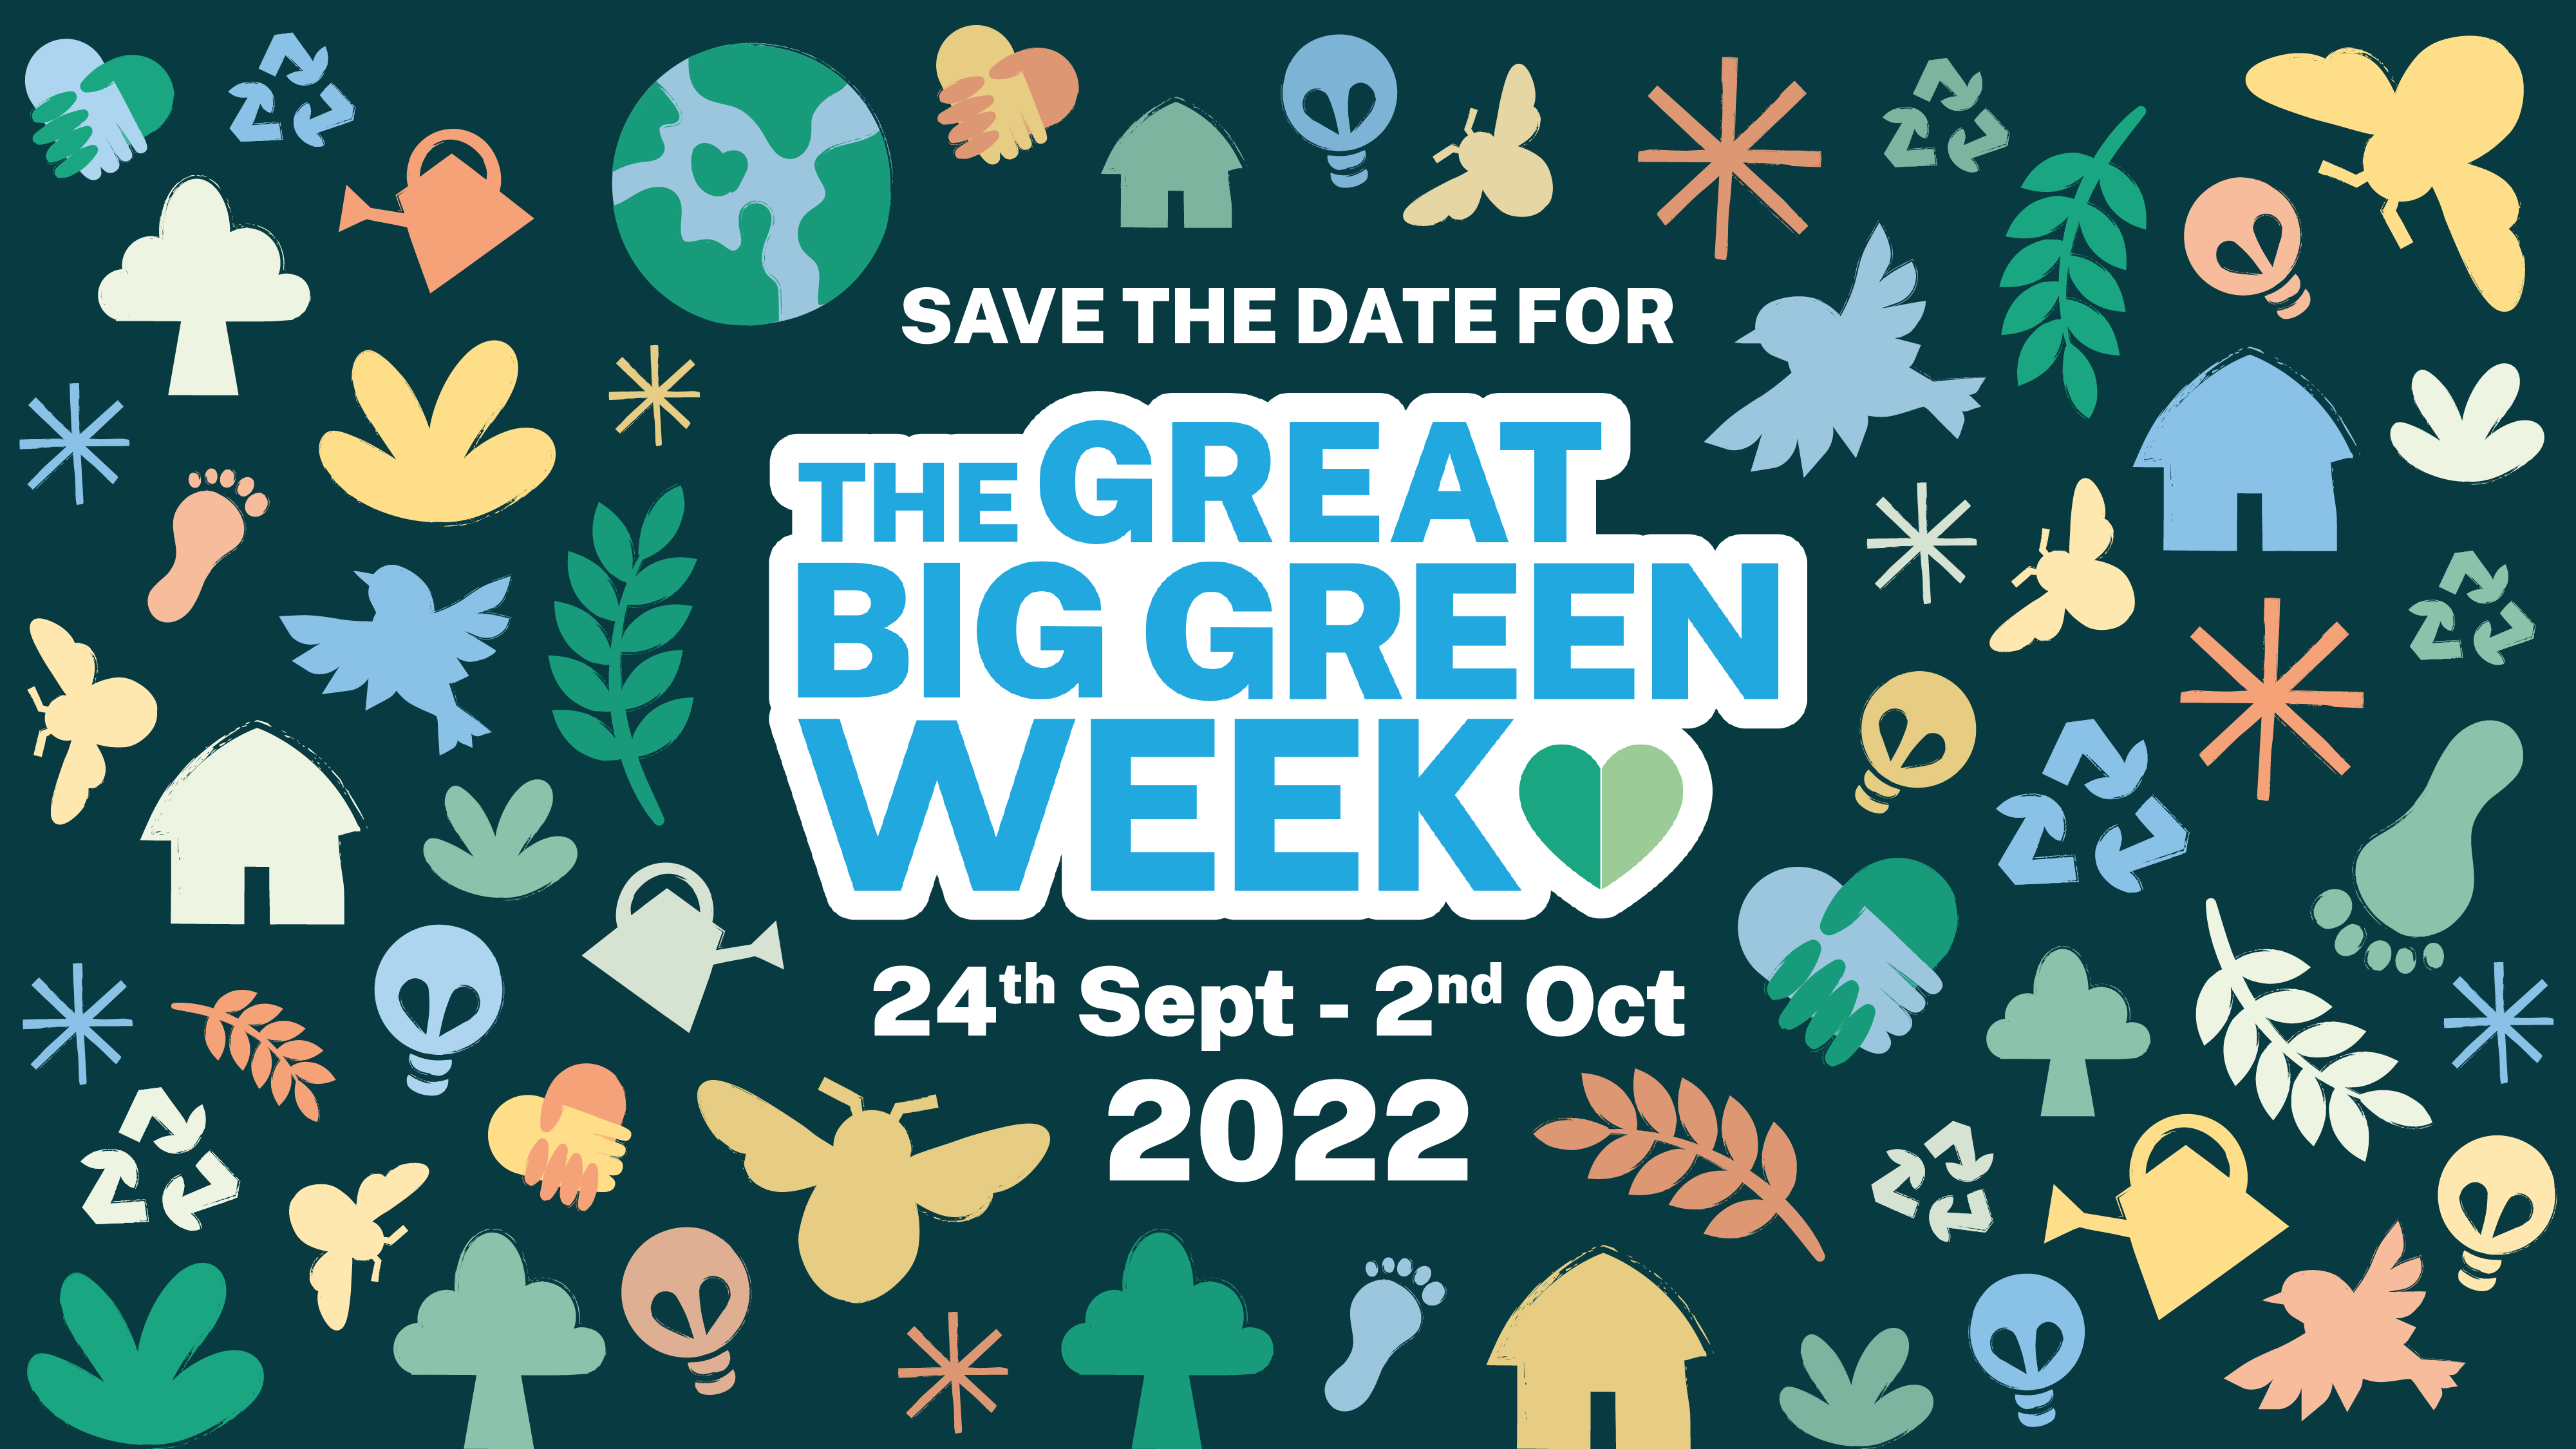 Save the date for The Great Big Green Week. 24 September to 2 October 2022